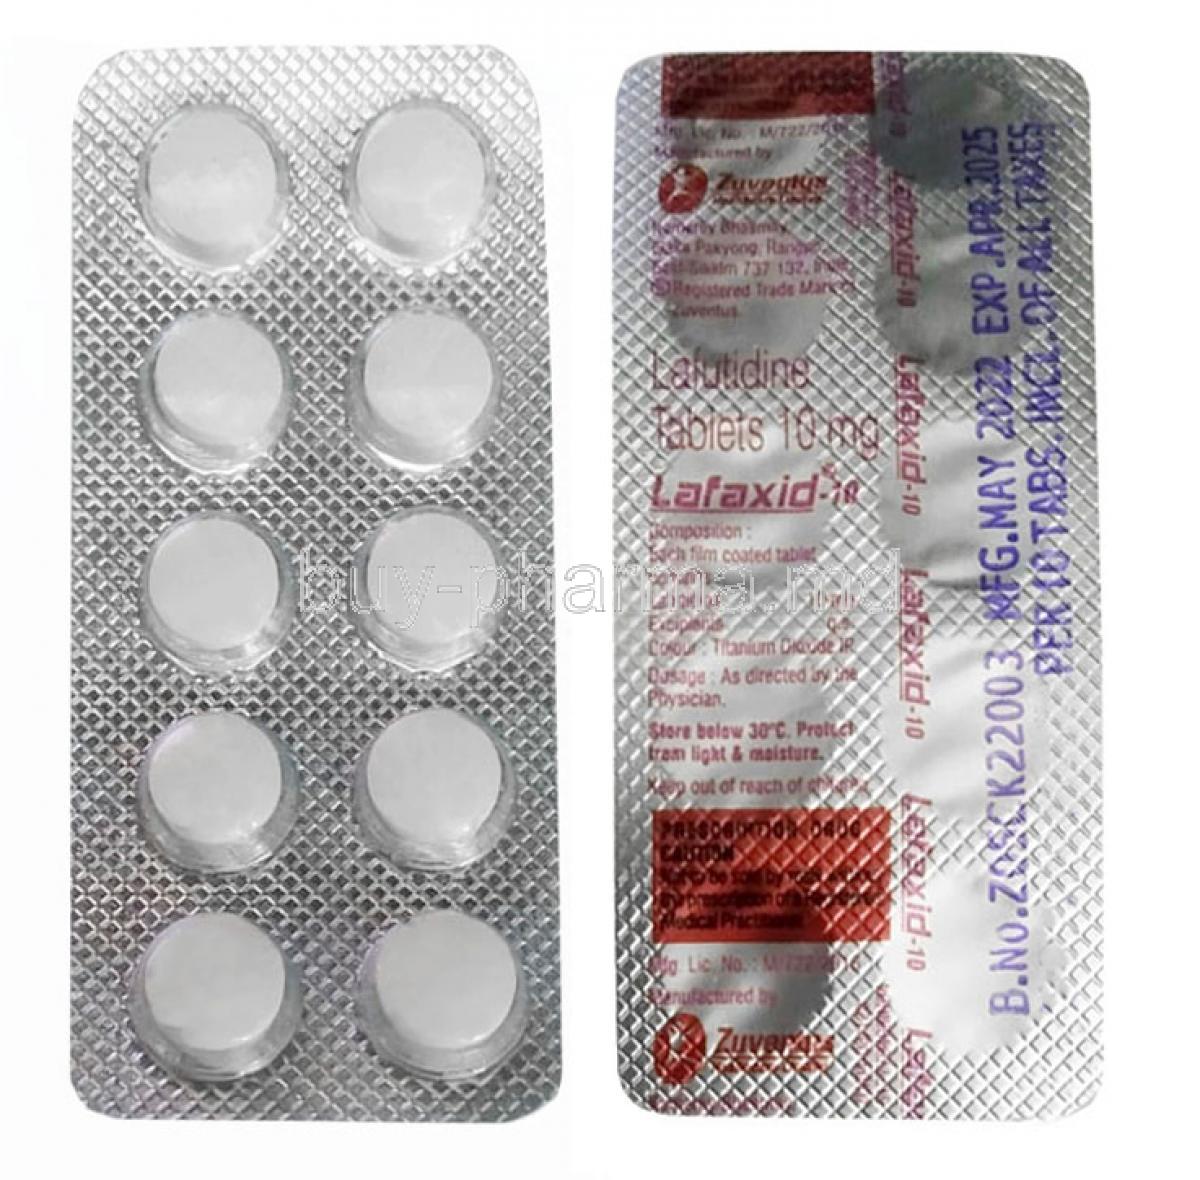 Lafaxid, Lafutidine 10mg, Zuventus Healthcare, Blisterpack front and back view